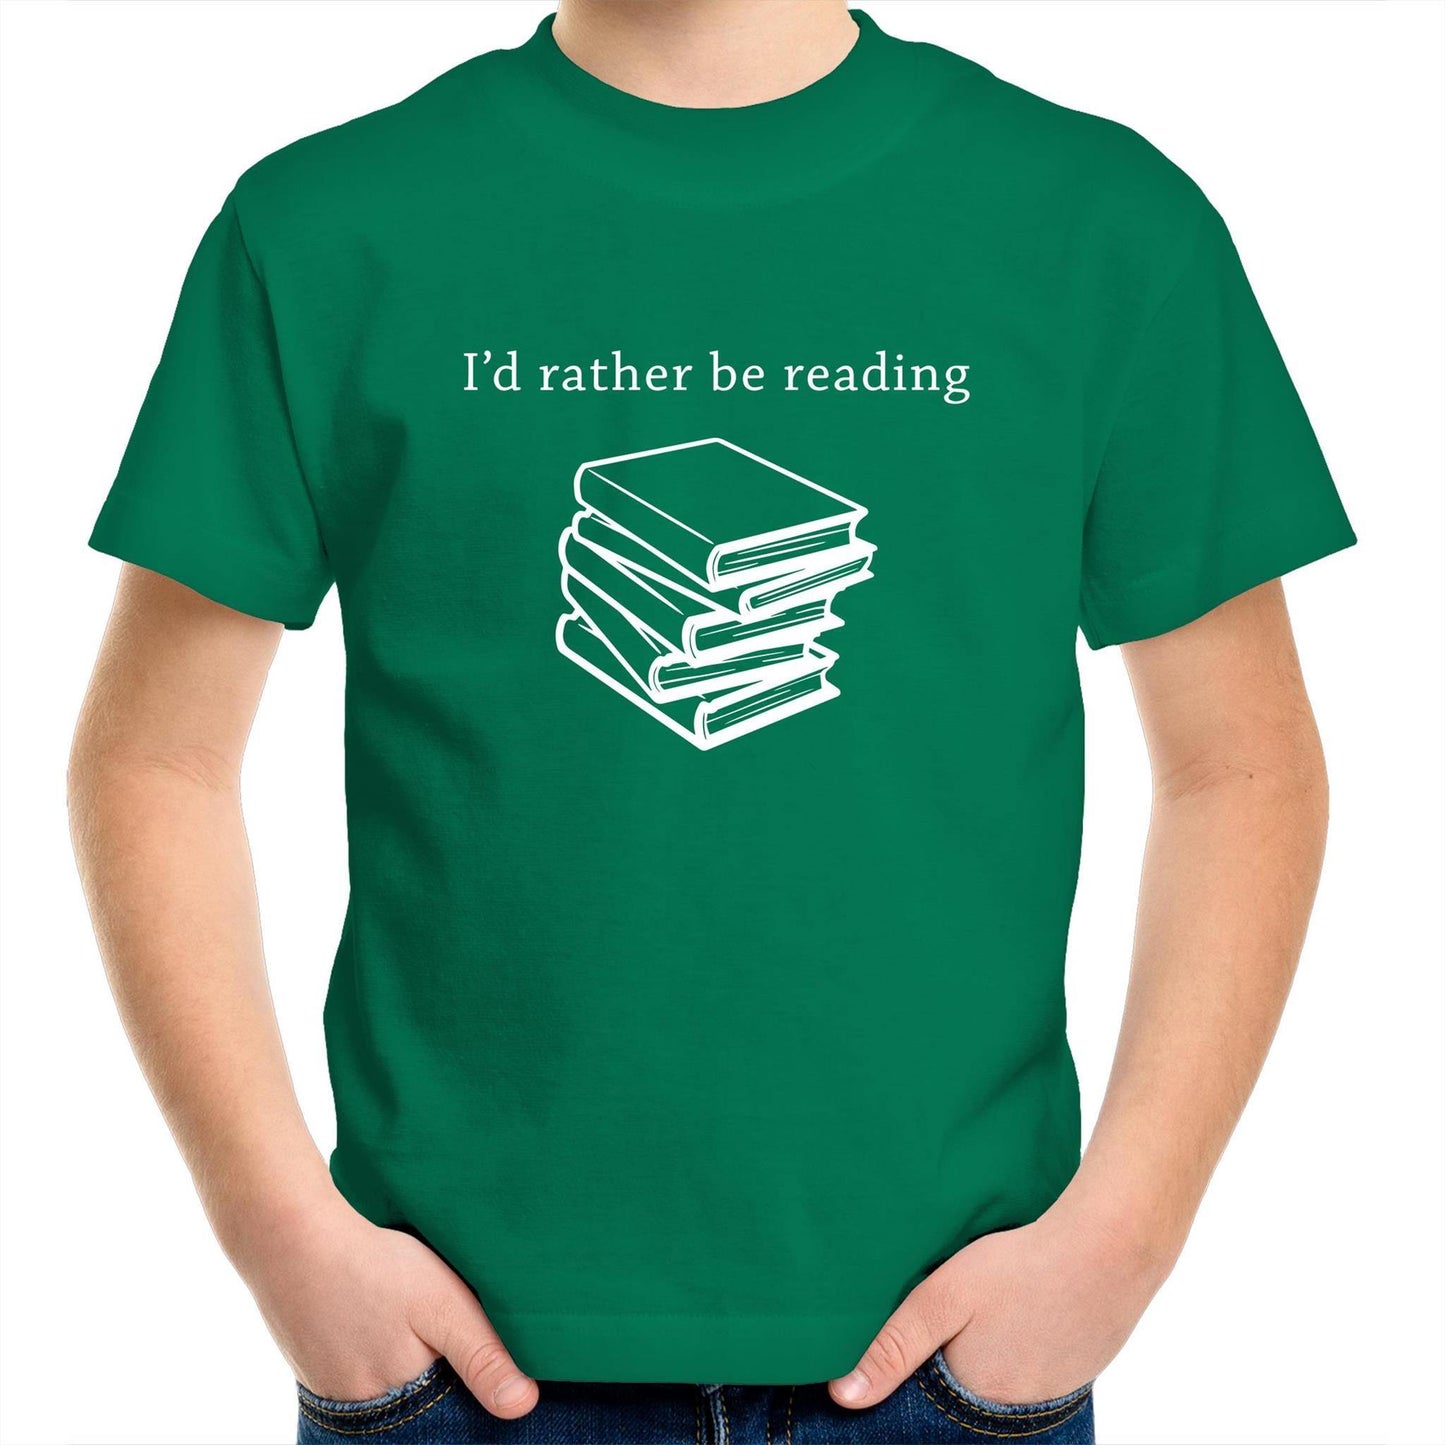 I'd Rather Be Reading - Kids Youth Crew T-Shirt Kelly Green Kids Youth T-shirt Funny